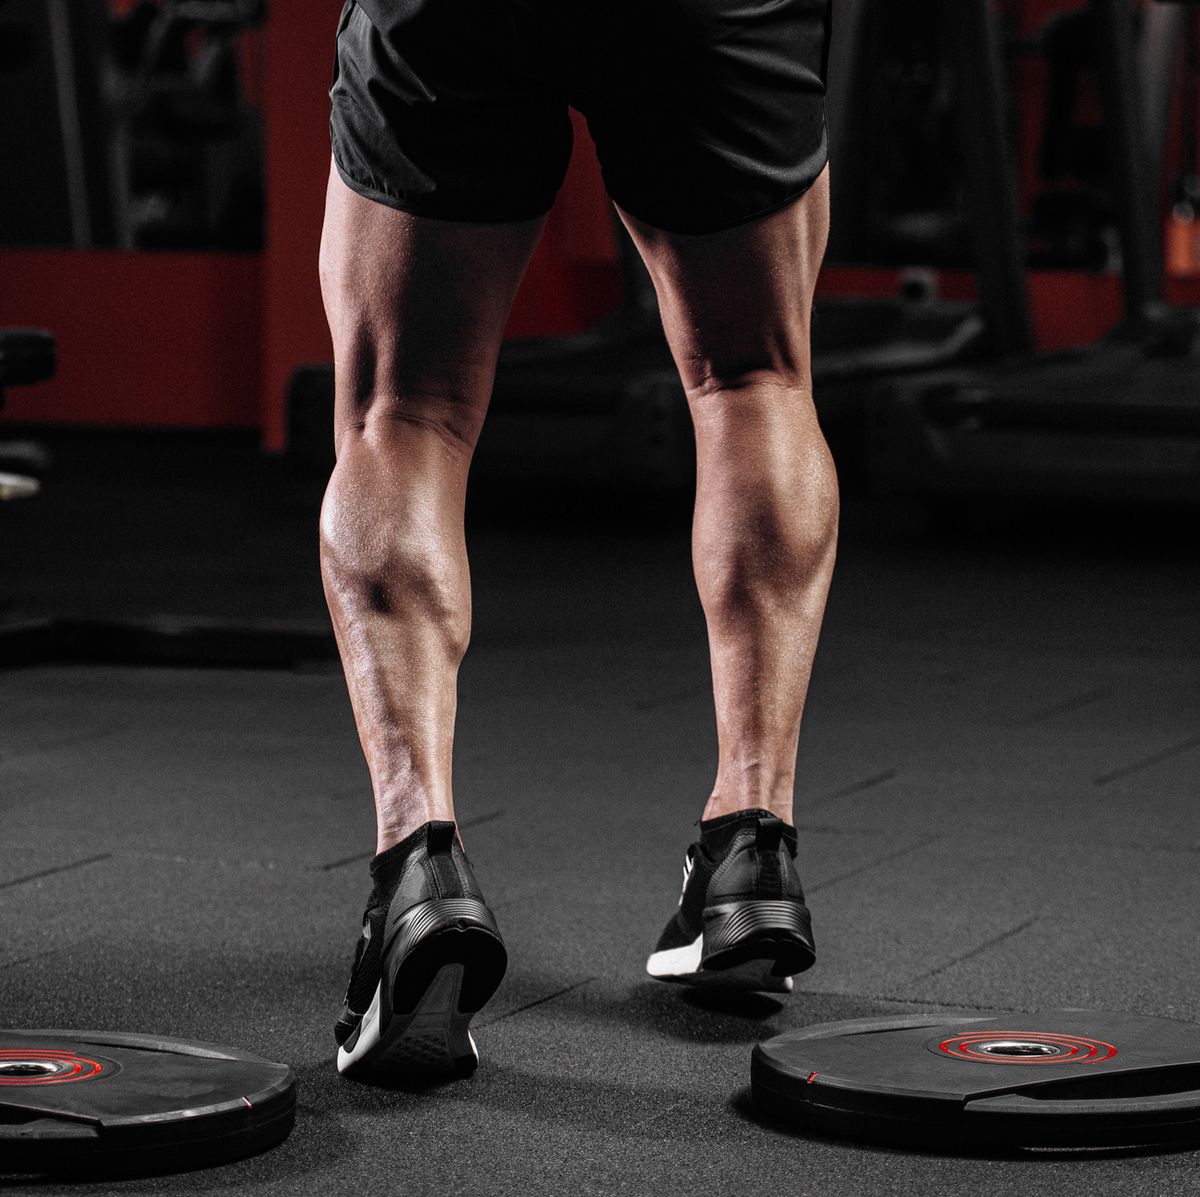 How To Build Bigger Calves Muscle in Your Lower Legs - Muscle & Fitness